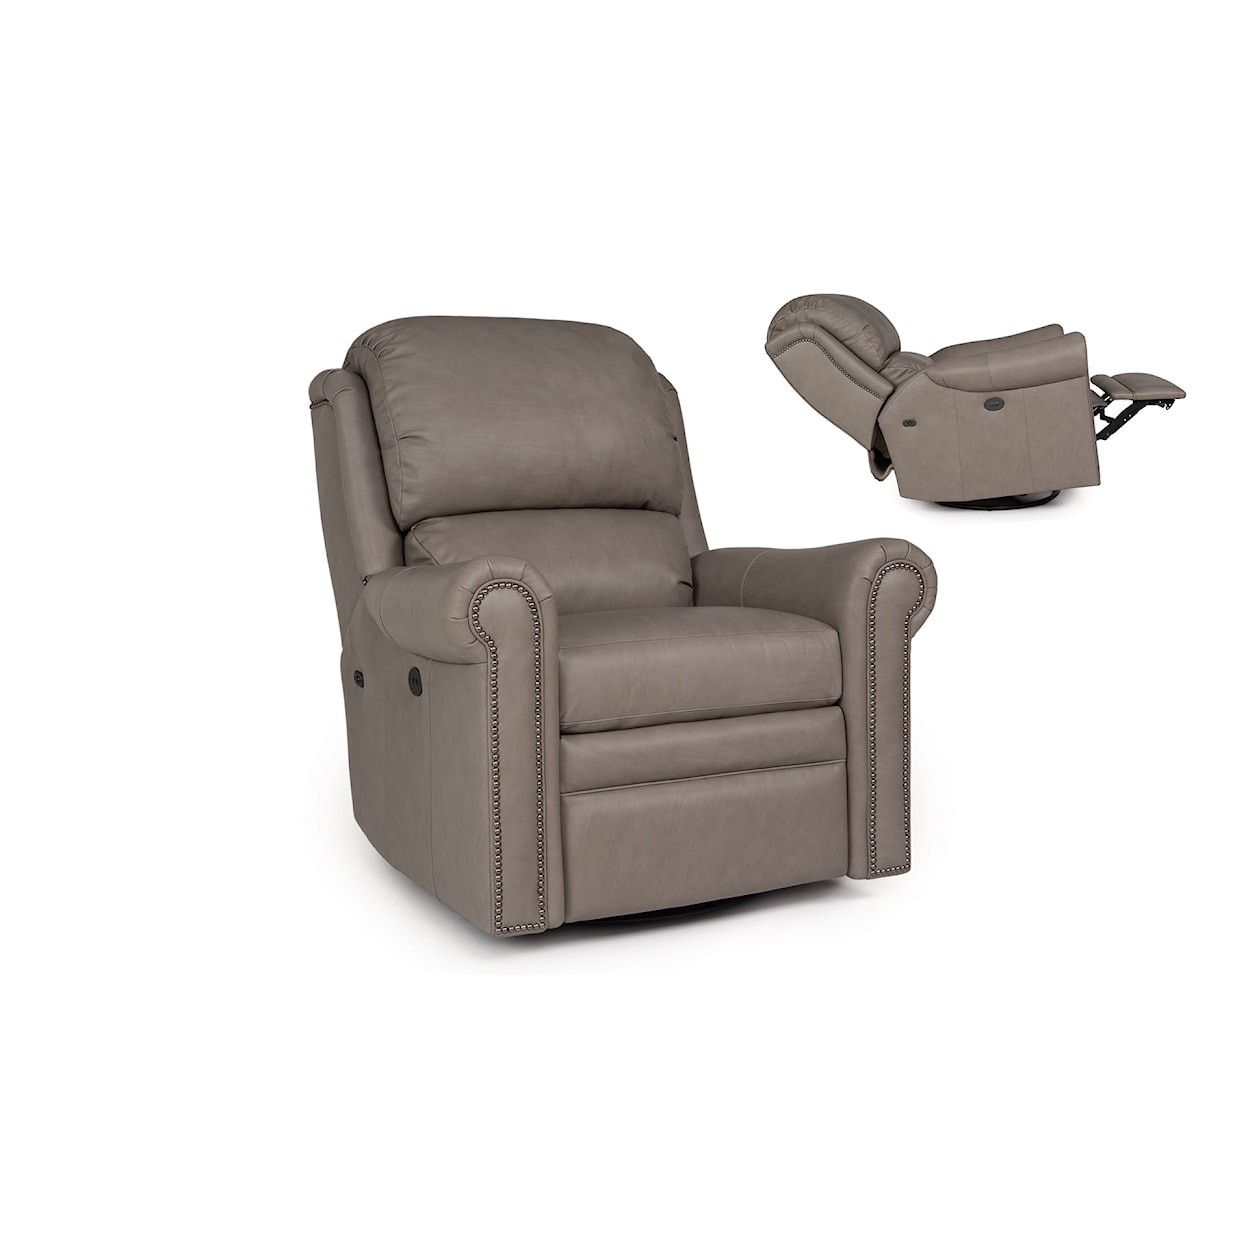 Smith Brothers 780 Motorized Swivel Glider Reclining Chair